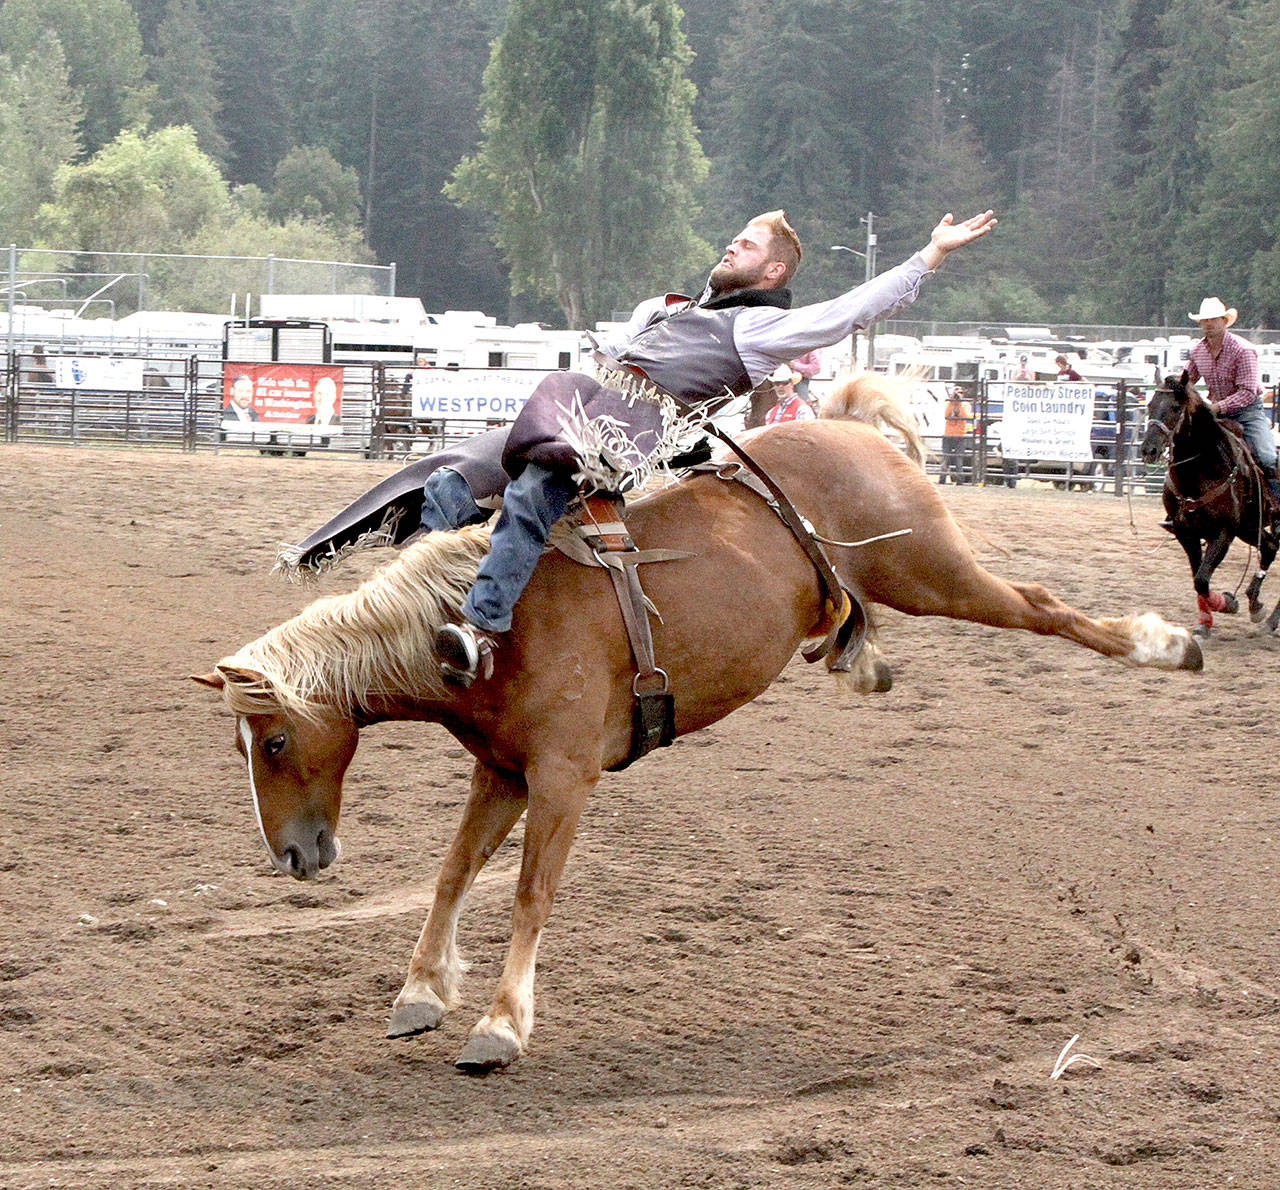 The last day of the Clallam County Fair, the rodeo competition concluded with bareback riding. Here, Kyle Bounds of Harrisburg, Ore. Oregon is given a wild ride by a horse named Capri. Bounds stayed on his horse for the required 8 seconds and finished second. First was Cole Snider, who won with a score of 80, taking home a purse of $984.96. Bounds, scored a 78 and won a purse of $722.30 Third place was Cole Appar with a score of 67 and a purse of $481.84. (Dave Logan/for Peninsula Daily News)